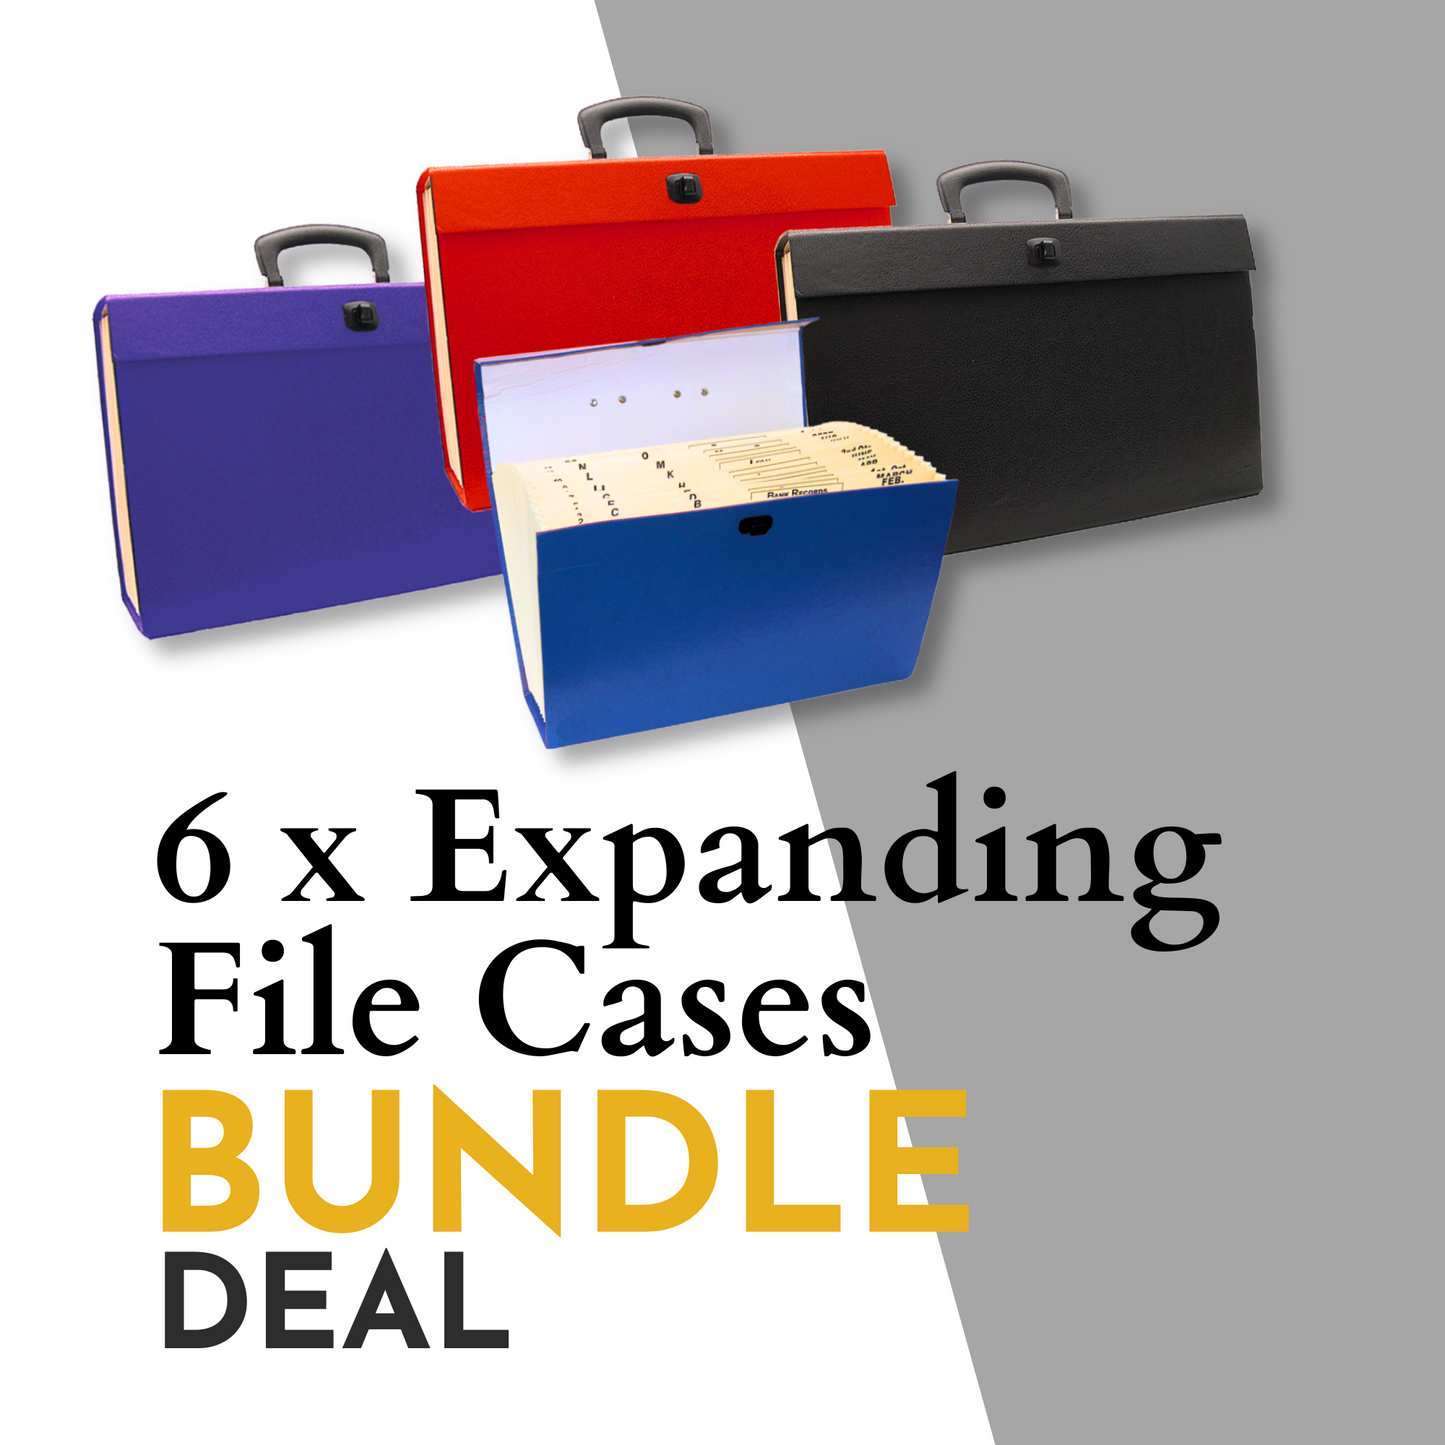  The image features a promotional graphic for a product bundle. It advertises "6 x Expanding File Cases" as a "BUNDLE DEAL". Displayed are four expanding file cases with handles, suggesting they are portable. The cases are colored in vibrant hues: one in blue, one in red, one in purple and one in black. One of the cases is open, revealing tabbed file dividers inside, which are likely used for organizing documents. 